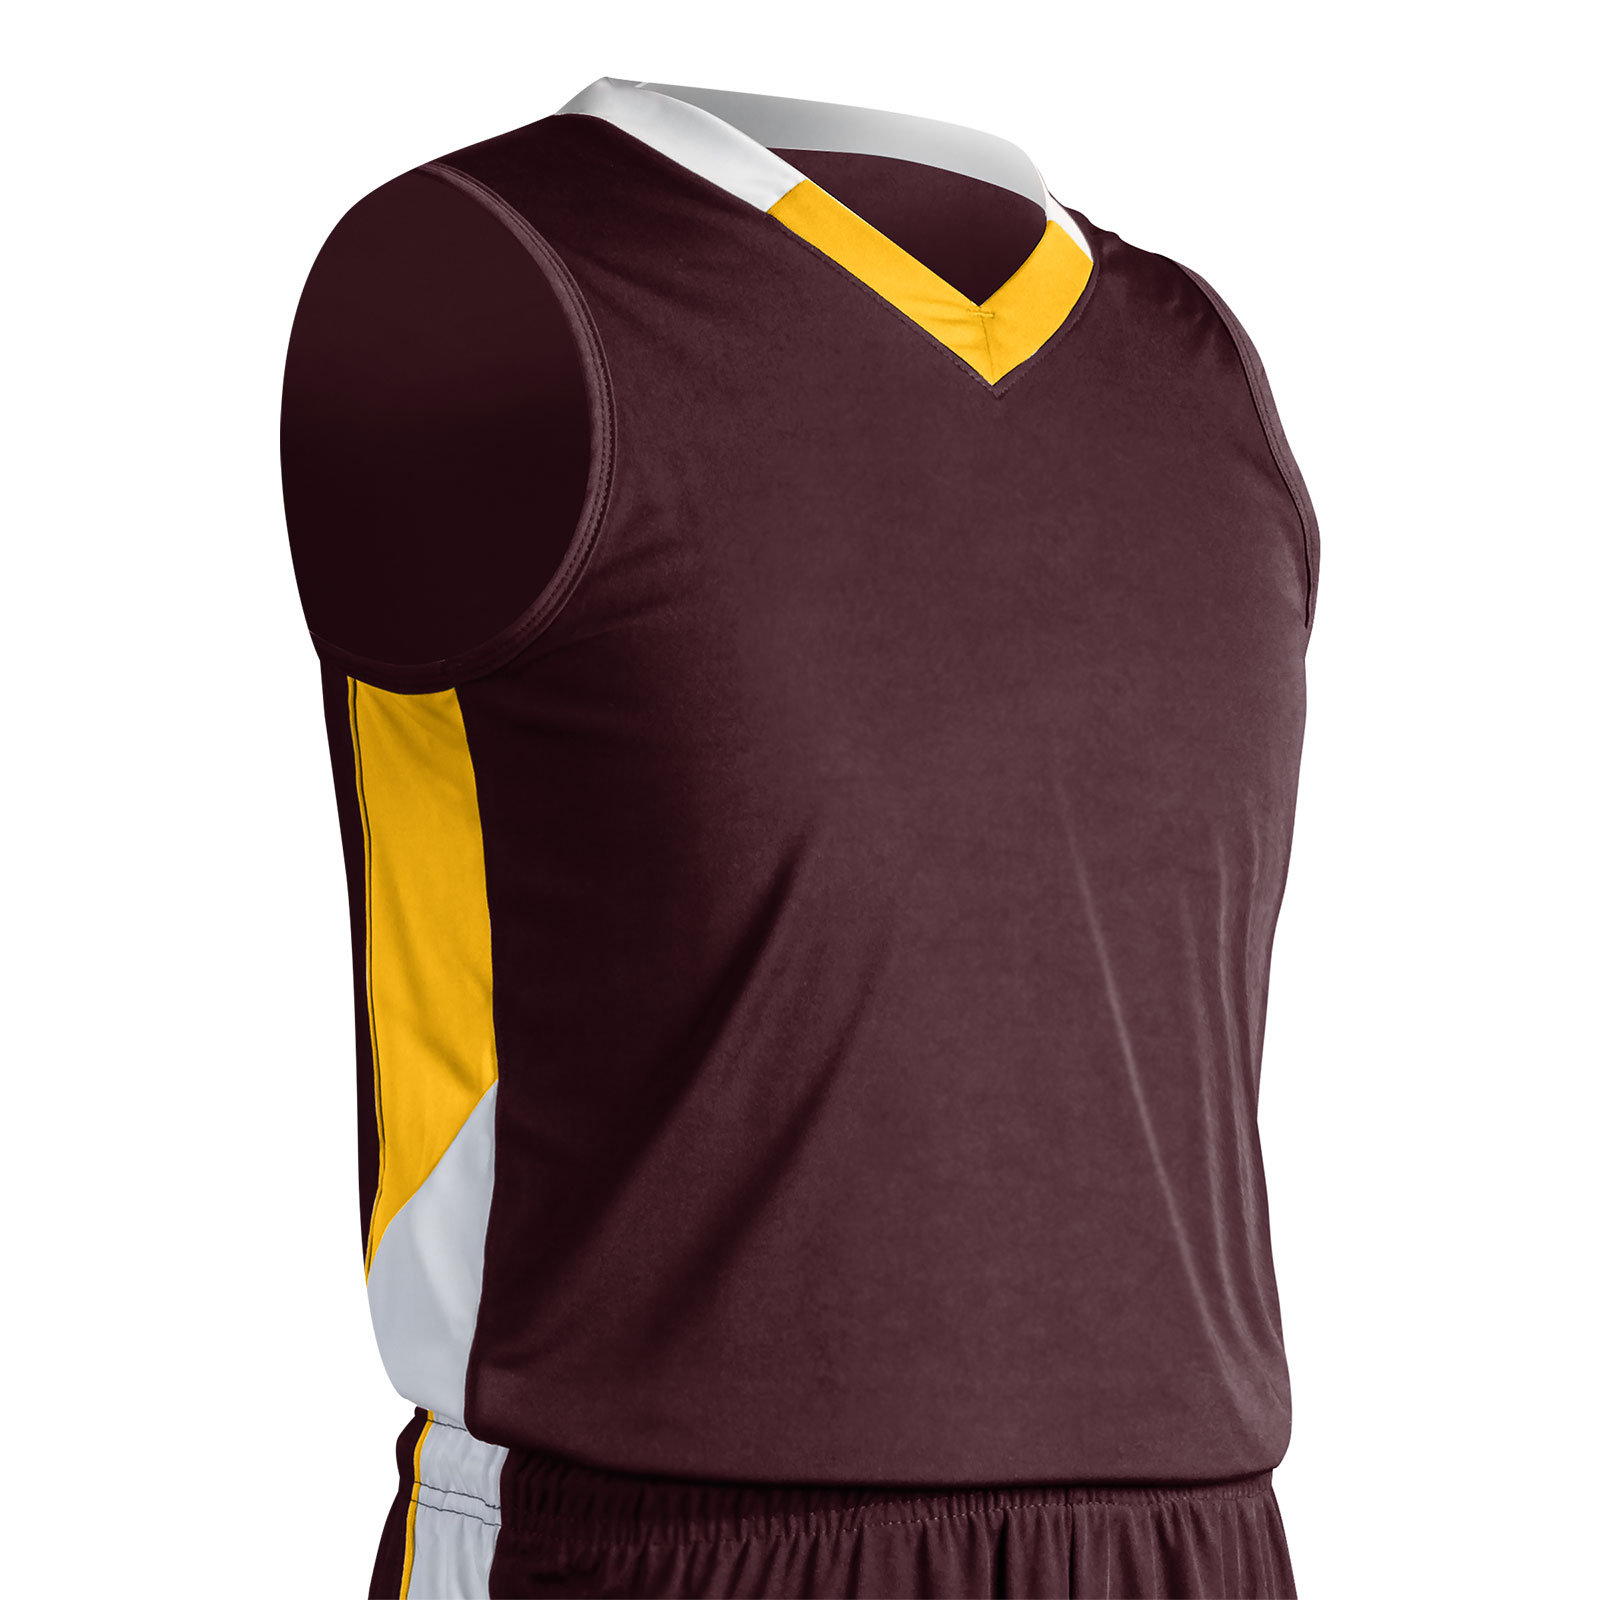 rebel basketball jersey maroon and gold